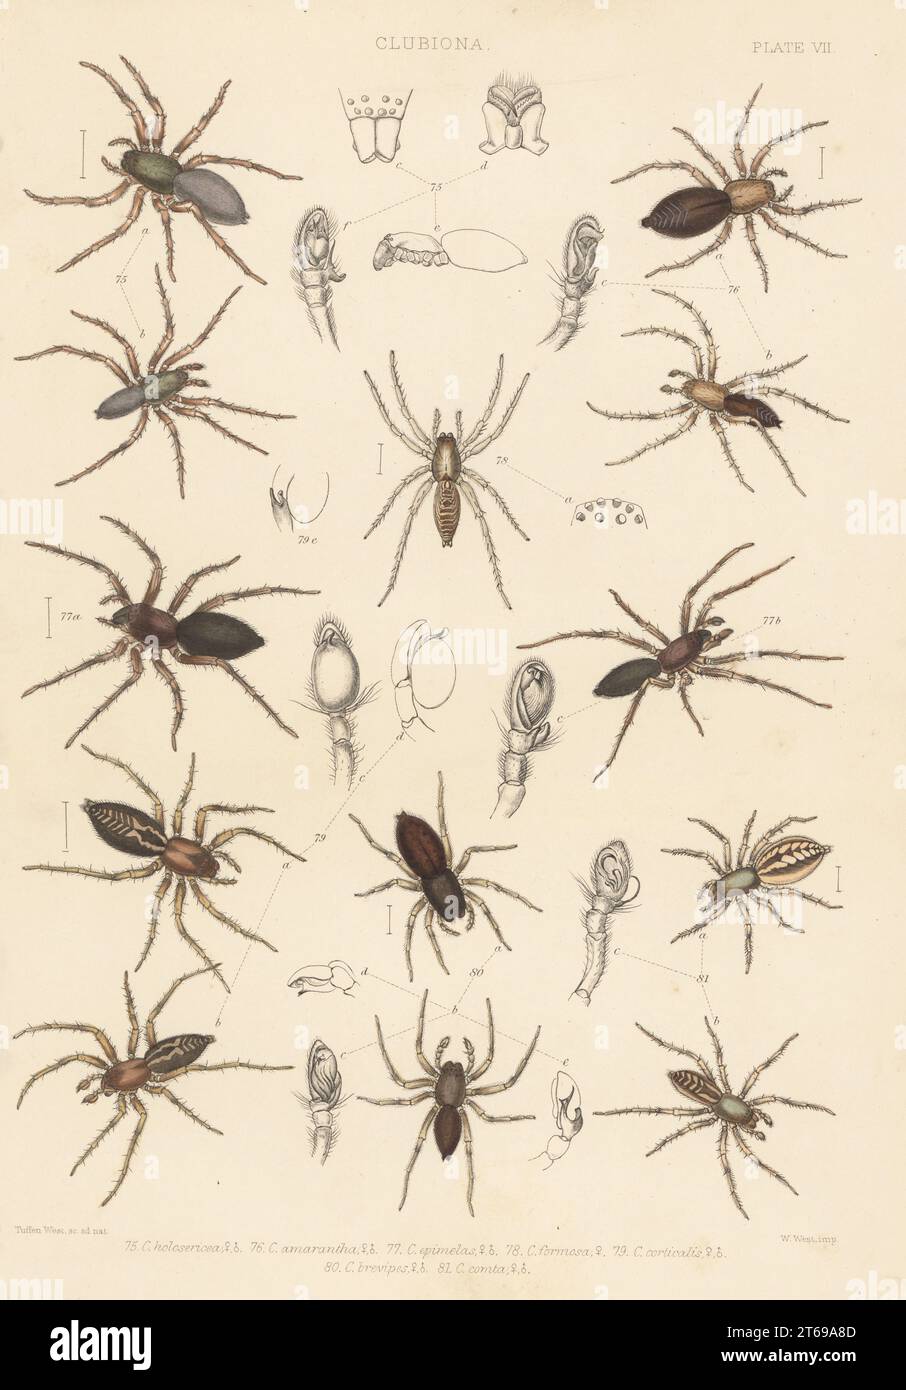 Sac spiders. Clubiona stagnatilis 75, Clubiona terrestris 76, Clubiona pallidula 77,78, bark sac spider, Clubiona corticalis 79, Clubiona brevipes 80, and Clubiona comta 81. Handcoloured lithograph by W. West after Tuffen West from John Blackwalls A History of the Spiders of Great Britain and Ireland, Ray Society, London, 1861. Stock Photo